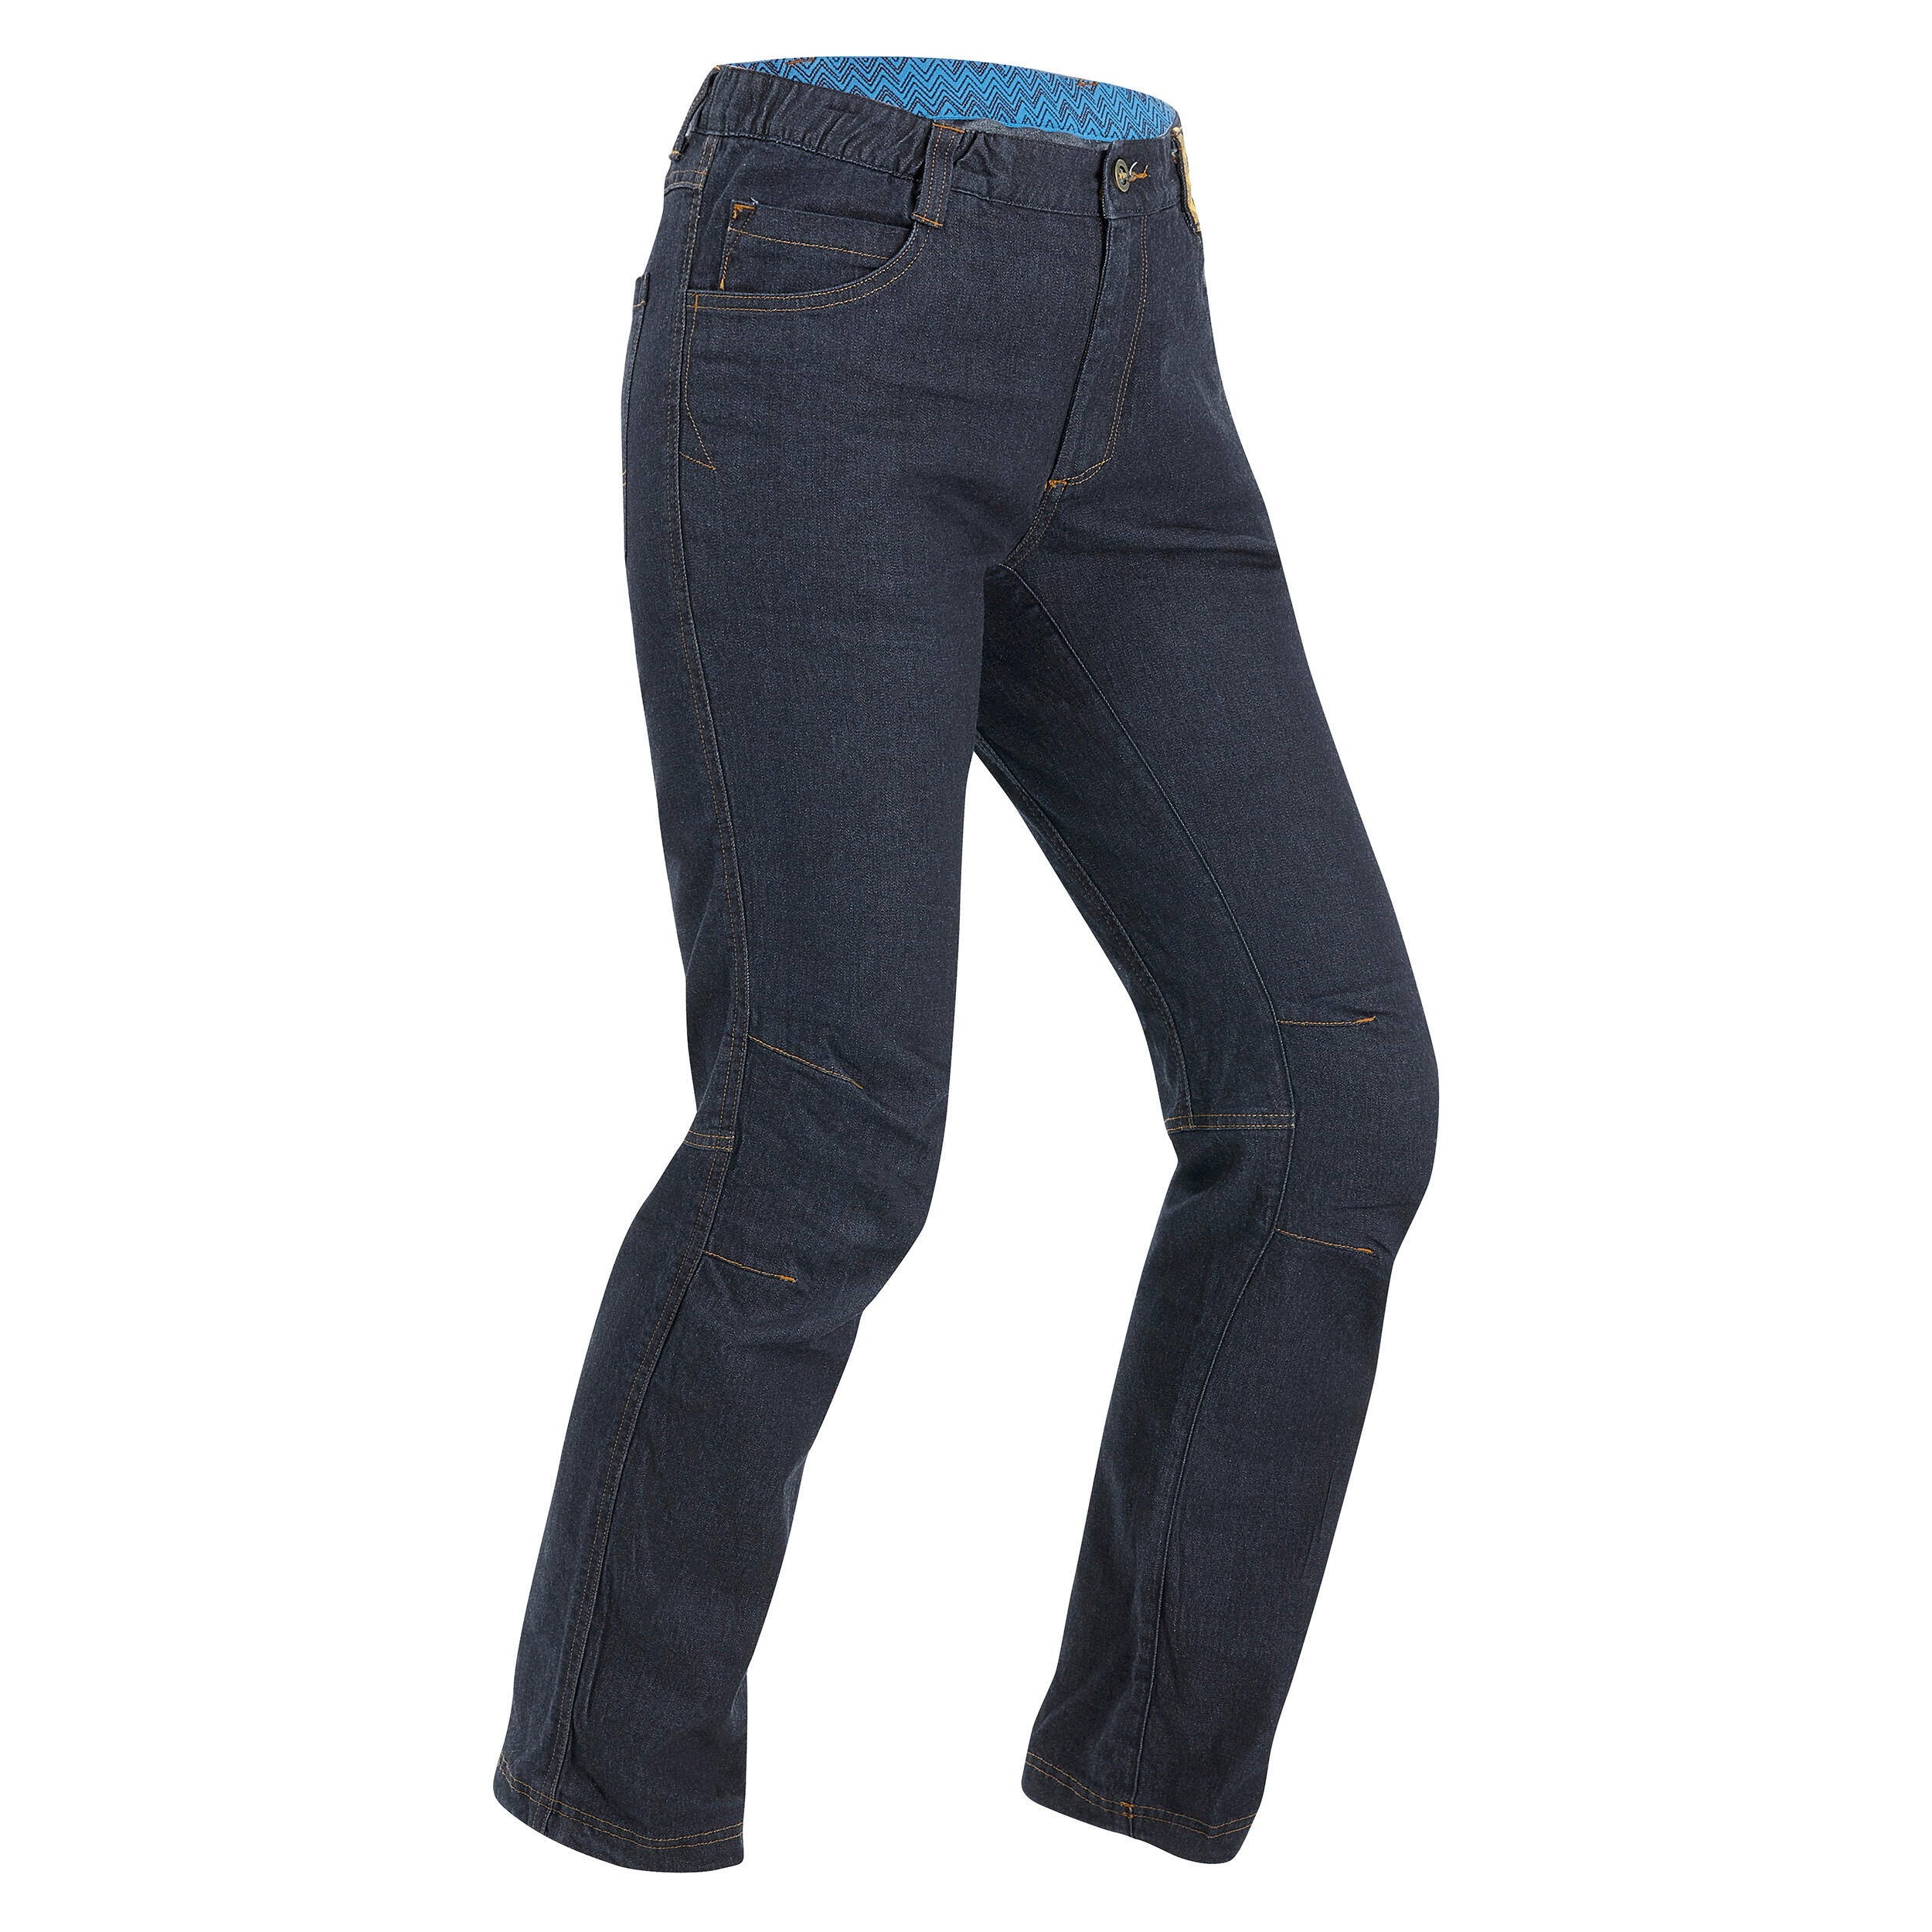 Buy Simond Mens Comfort II Climbing Trousers  Blue Online at Low Prices  in India  Amazonin